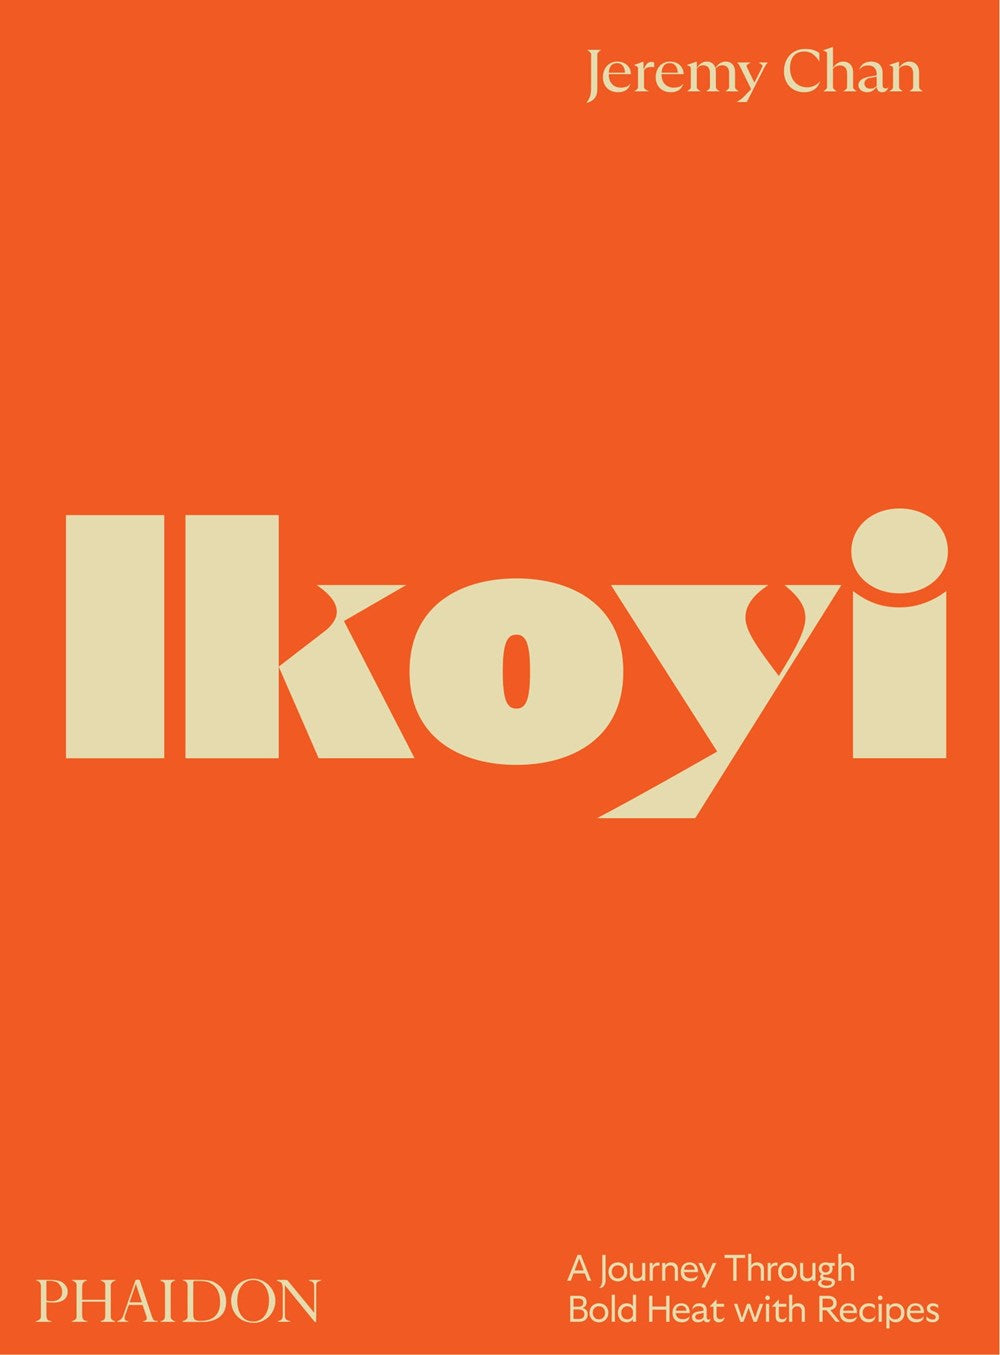 Ikoyi: A Journey Through Bold Heat with Recipes